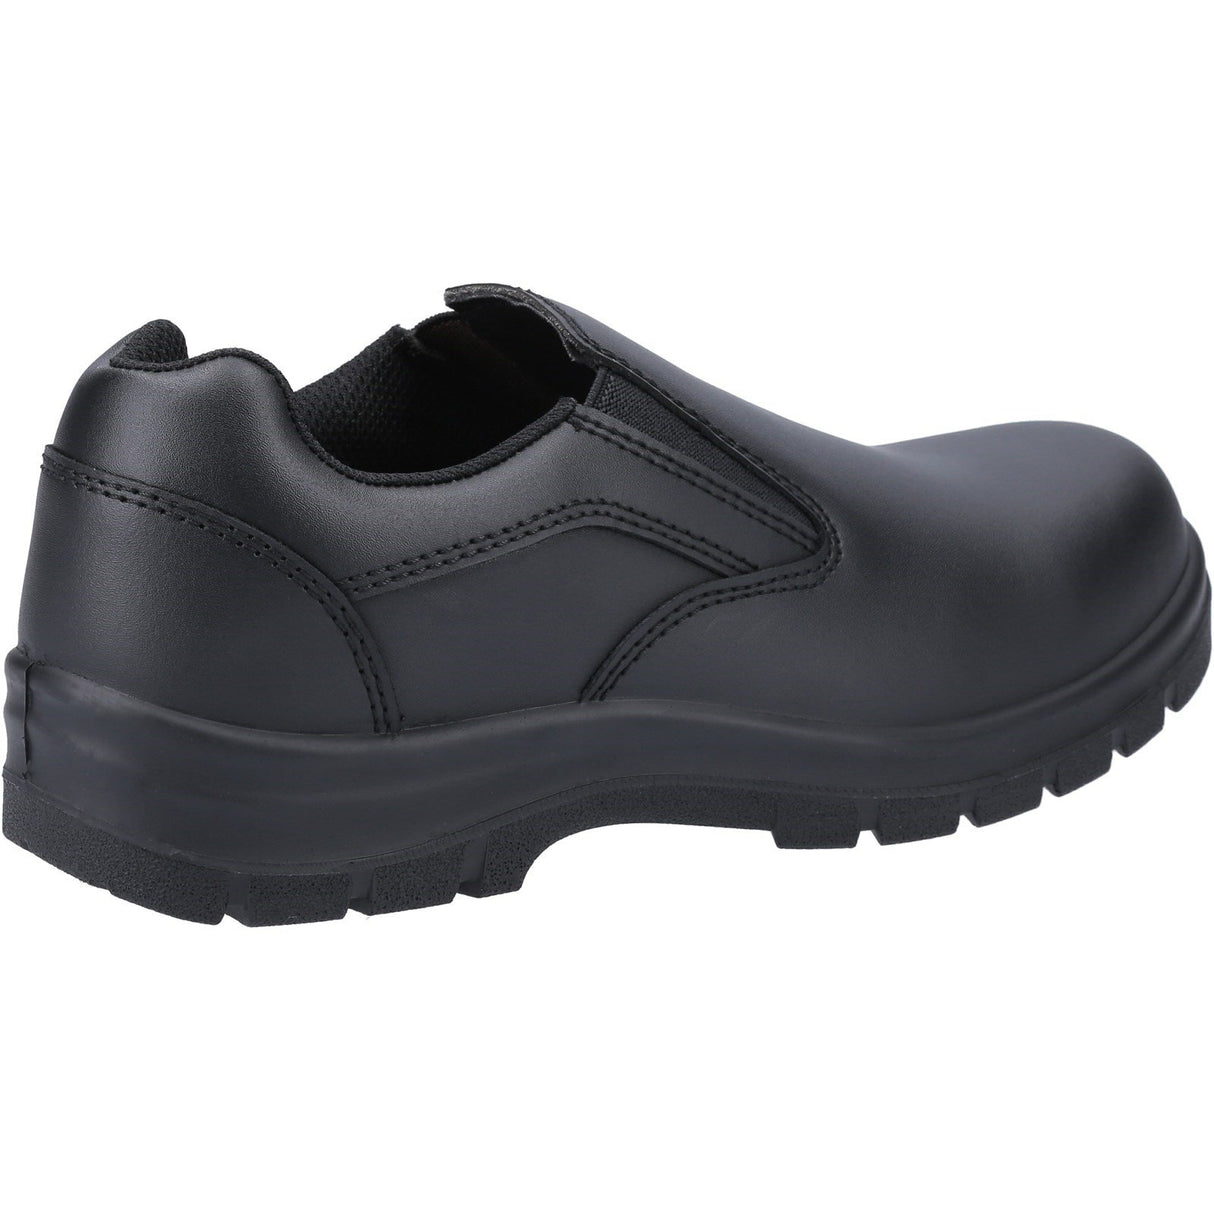 Amblers Safety AS716C Safety Shoes